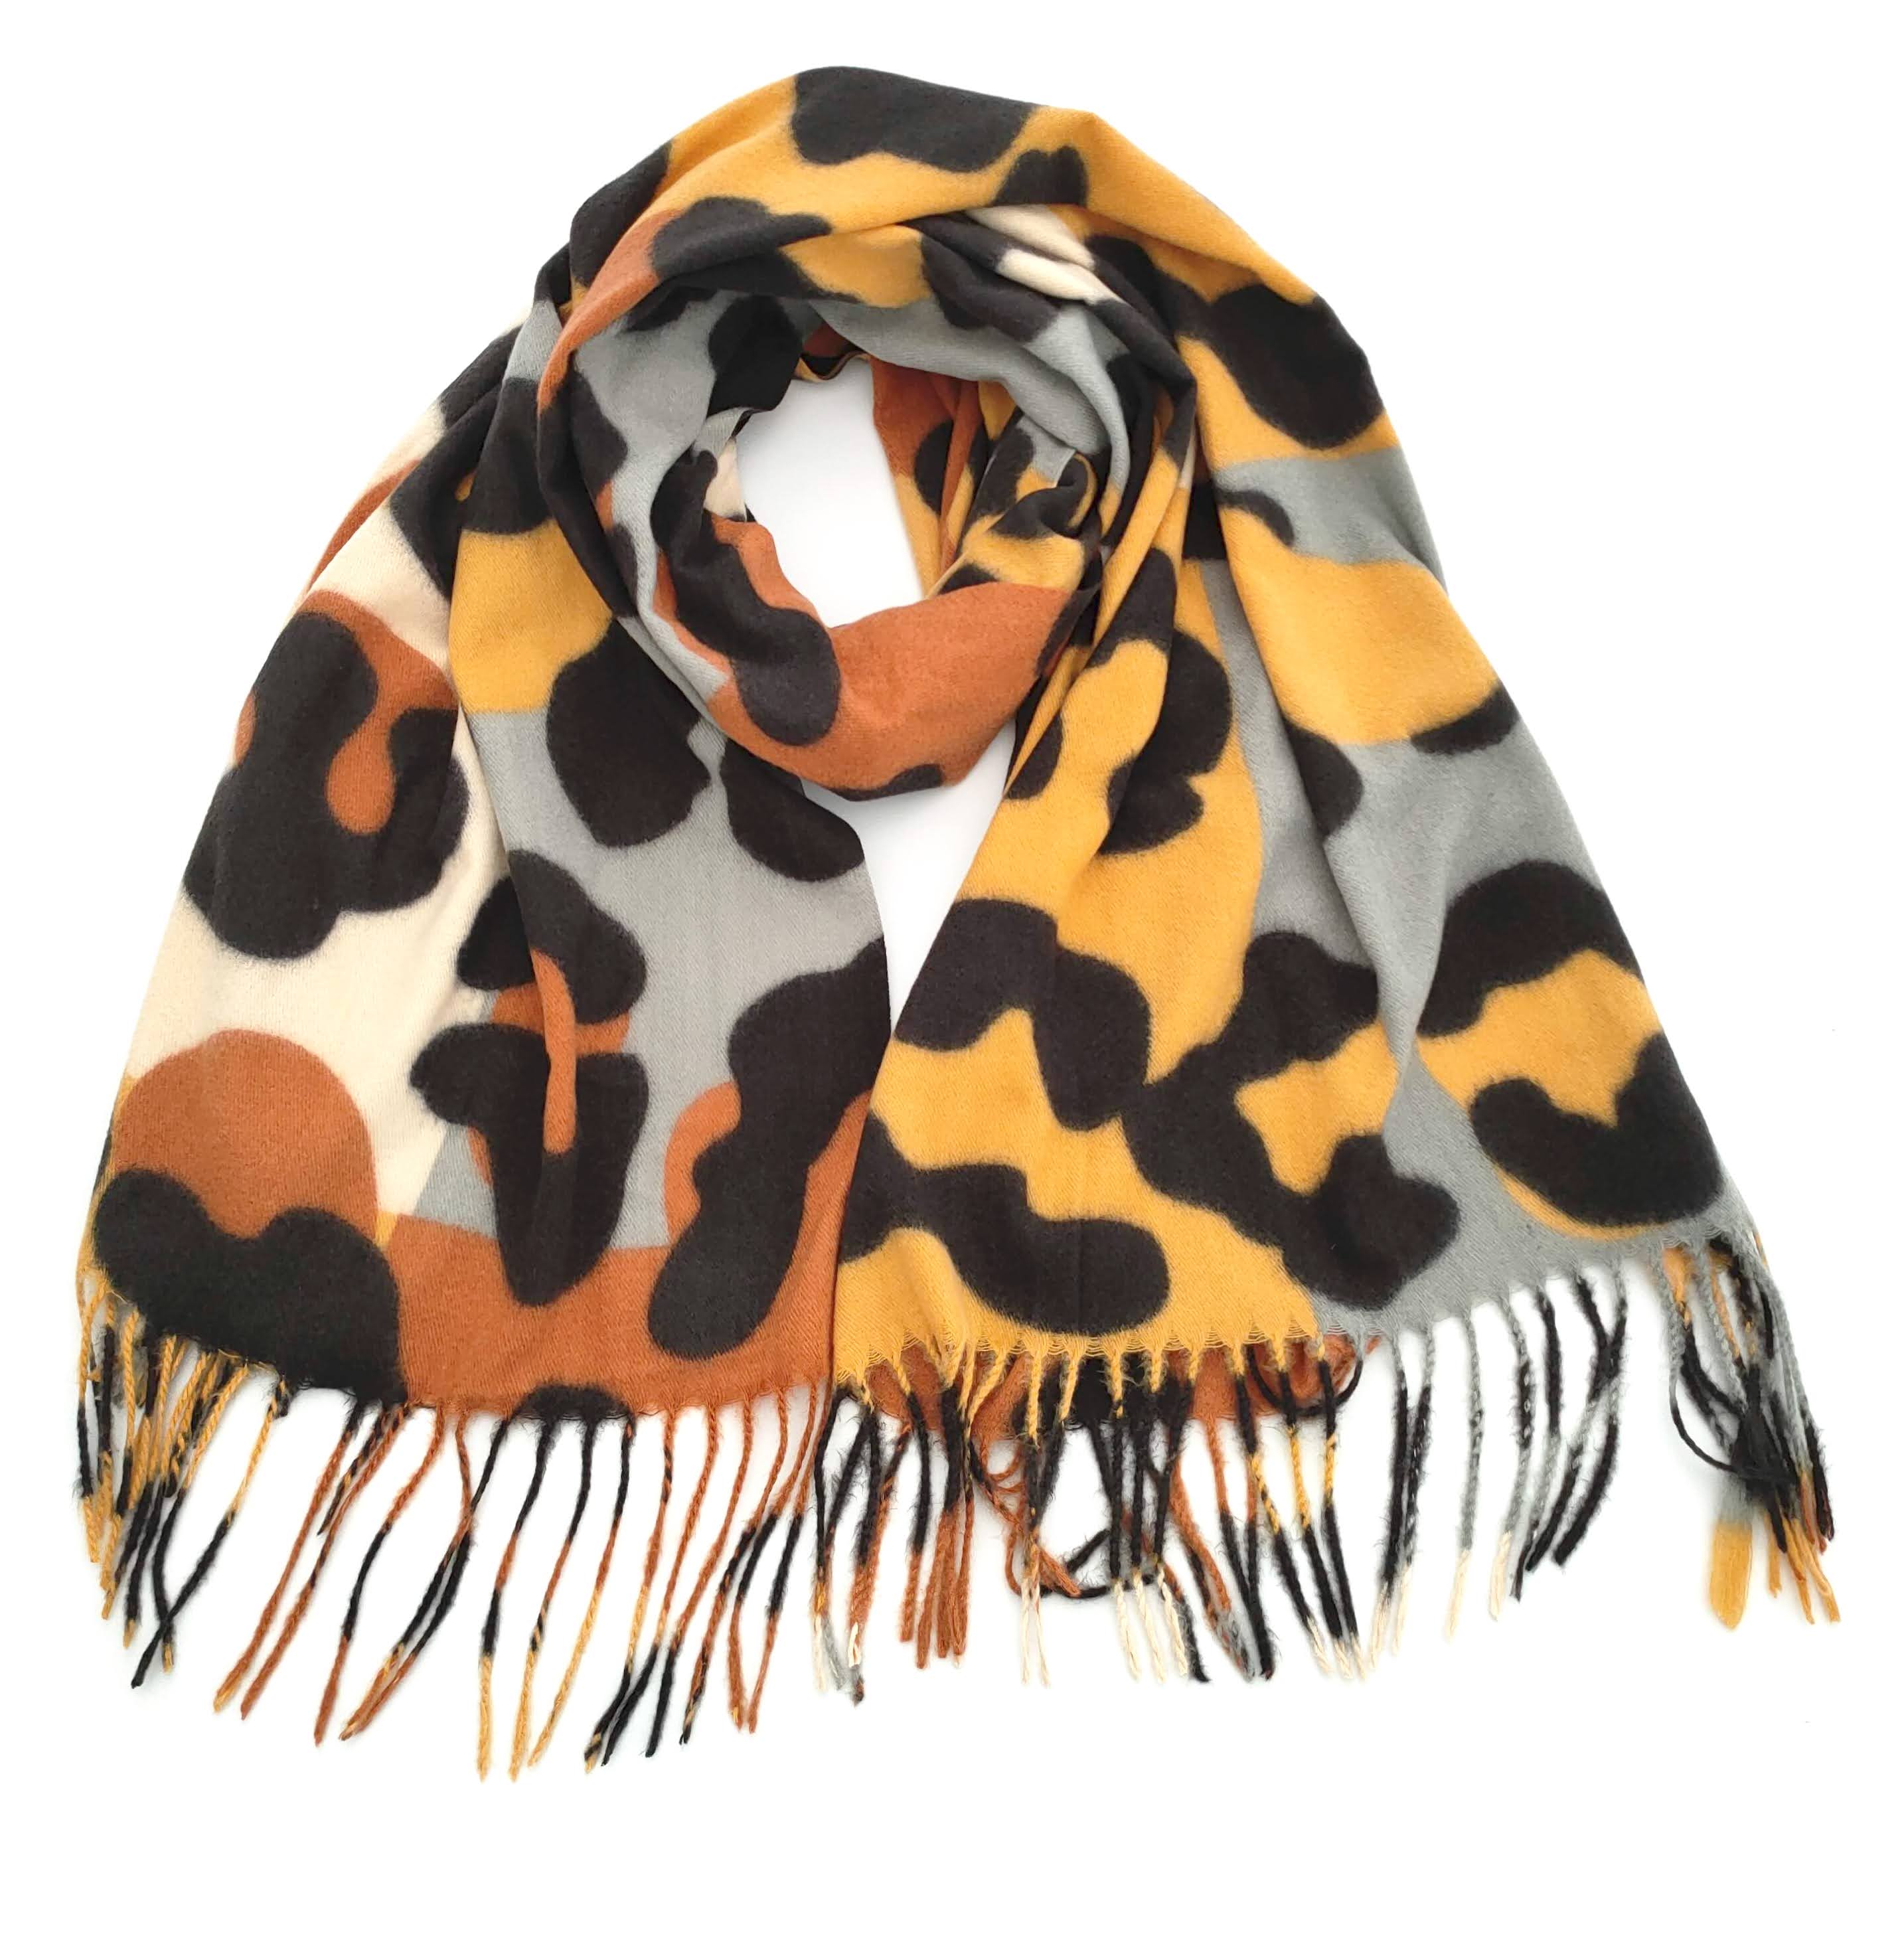 Cosy Thick & Tasselled Aniaml Print Scarf